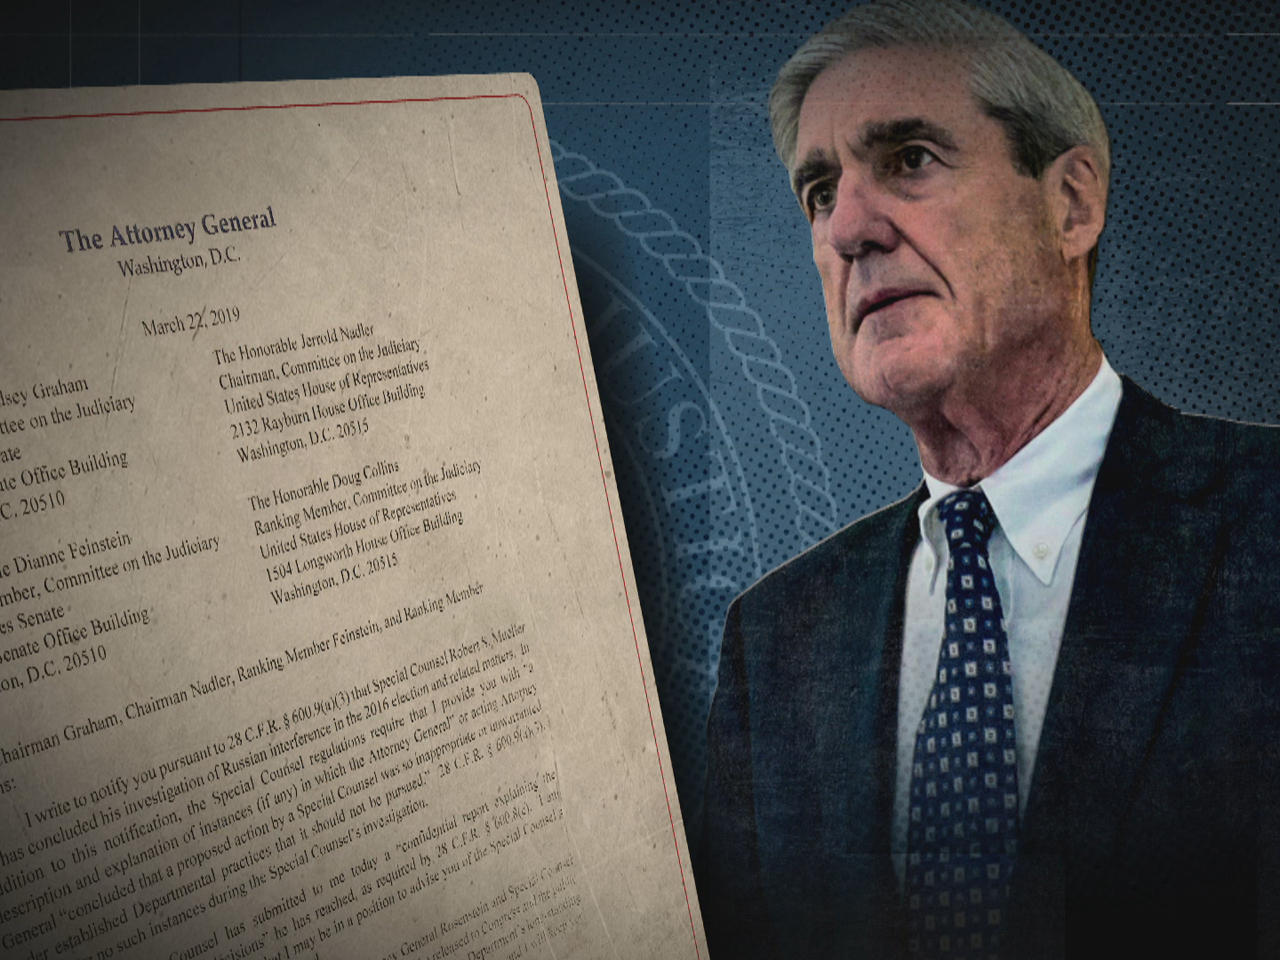 More info from Mueller report to be made available in weeks, not months